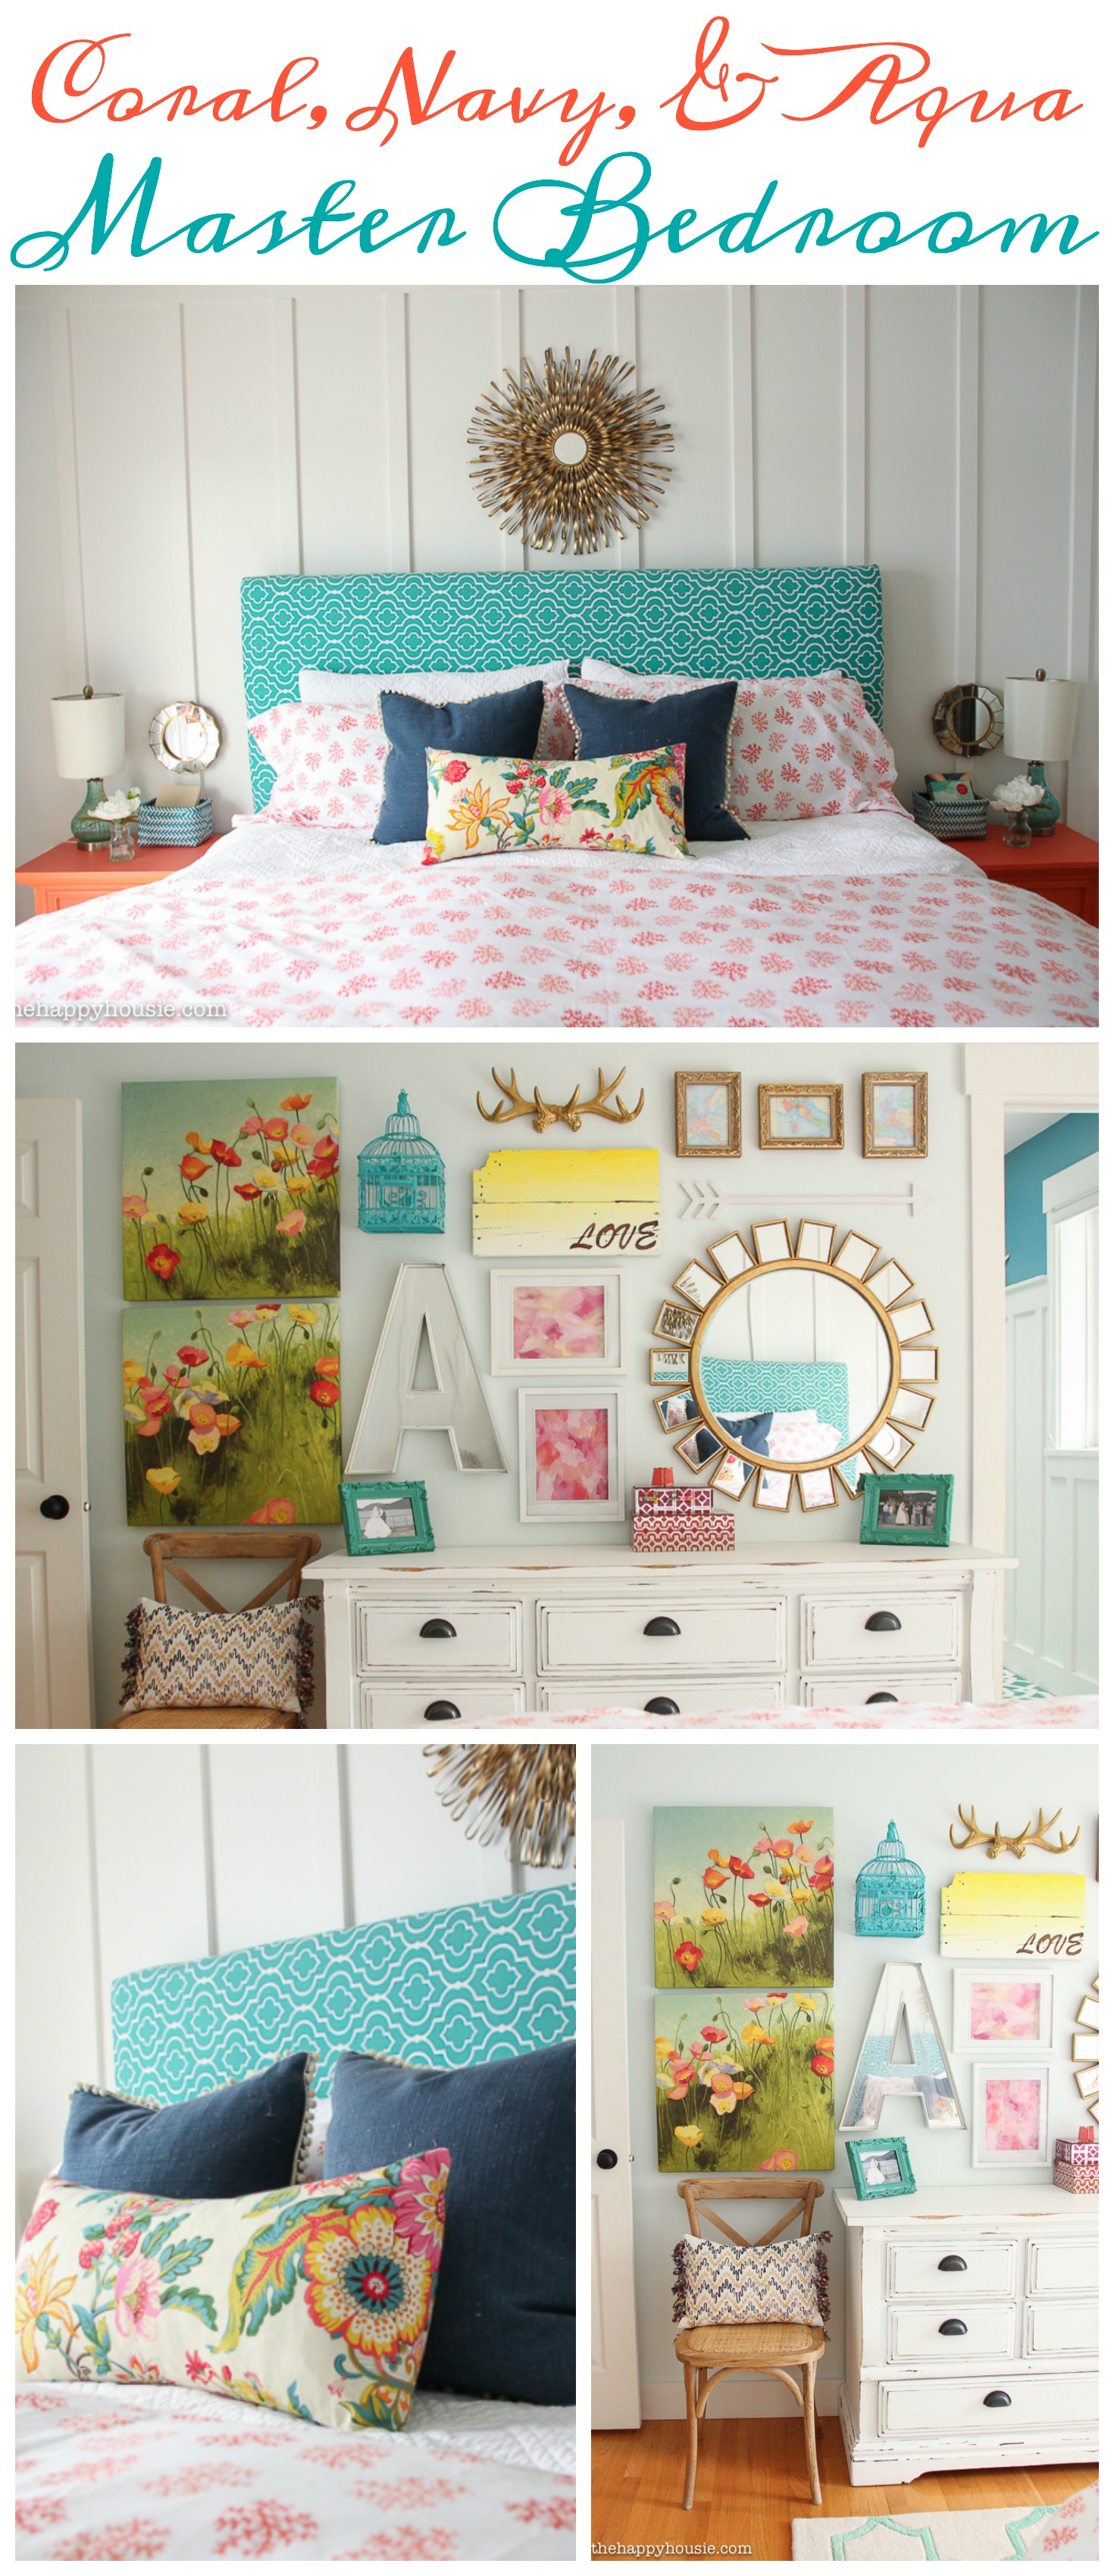 Amazing teal and coral bedroom ideas Our Coral Navy Teal Master Bedroom Ensuite The Happy Housie